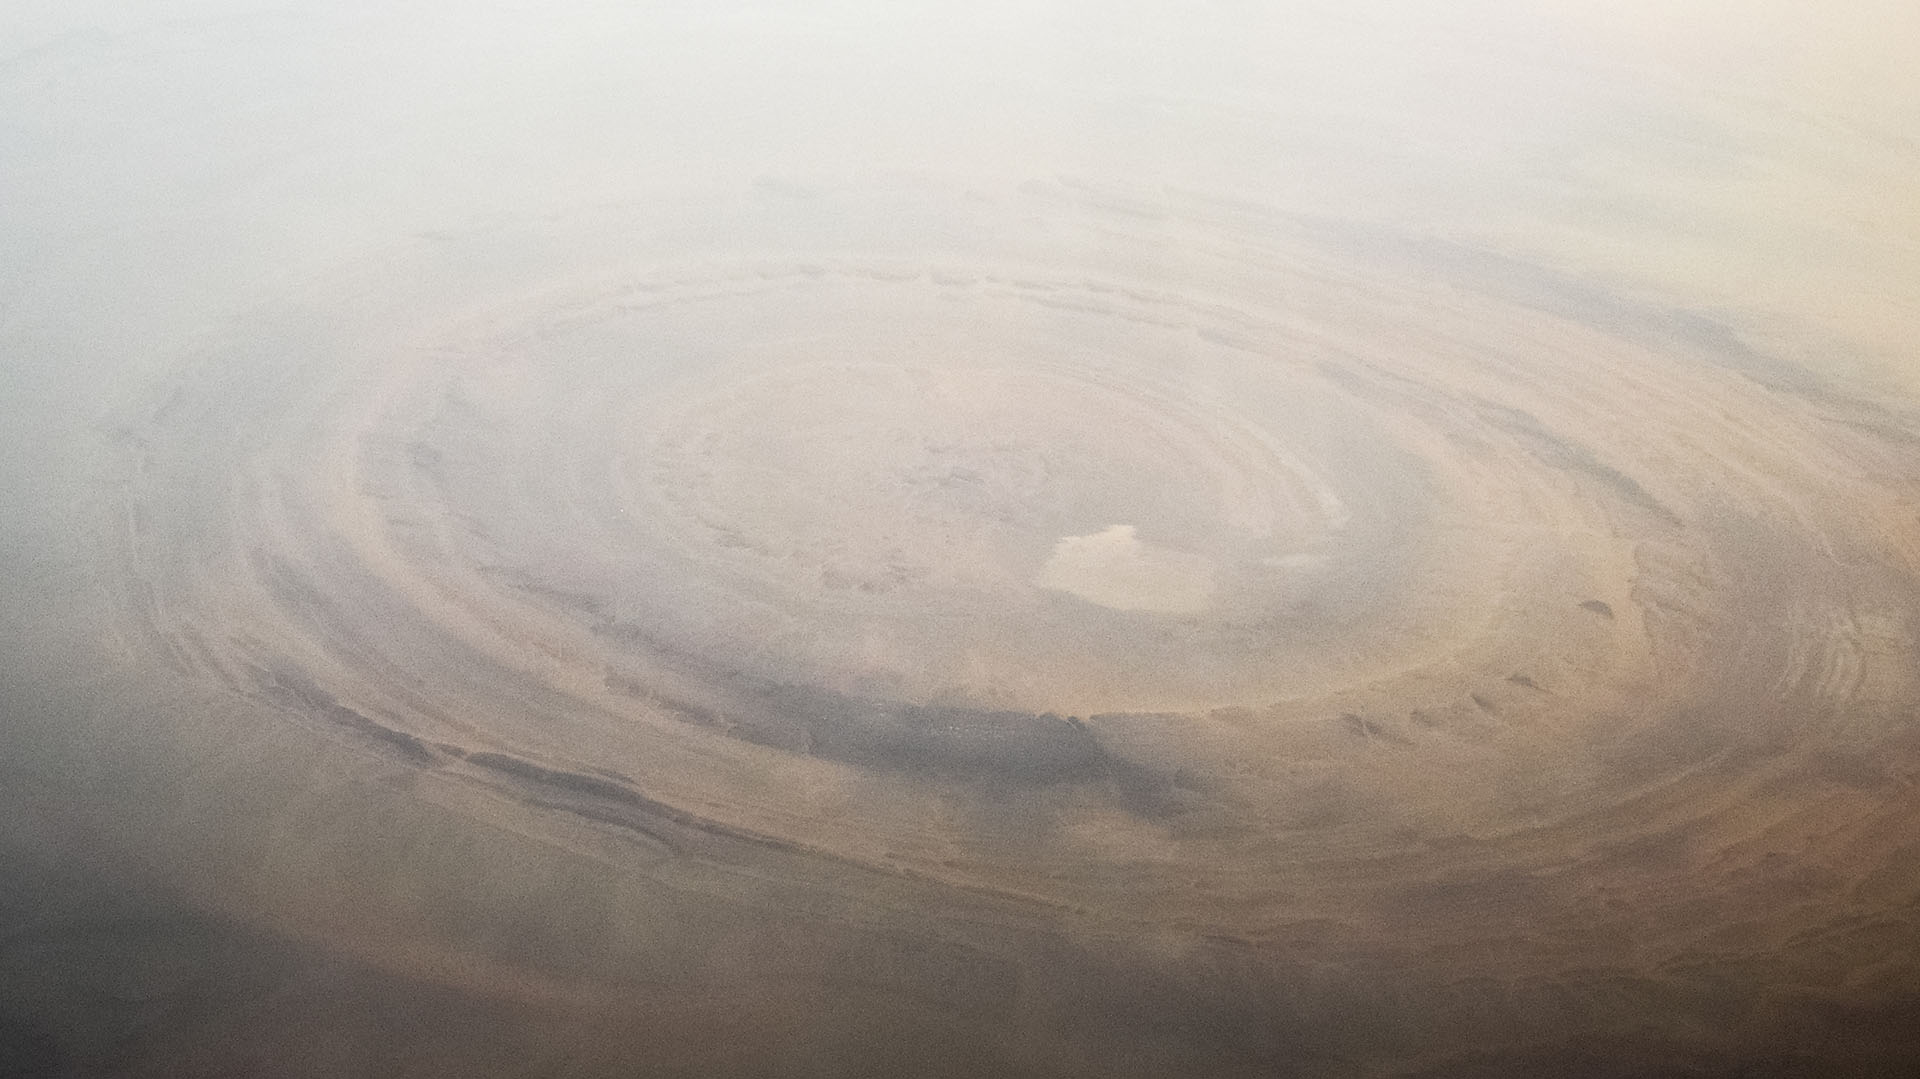 Sahara desert, Mauritania : Aerial view of the Richat Structure, also called Guelb er Richât, the "Eye of Africa" or "Eye of the Sahara" is a deeply eroded, slightly elliptical geologic dome with a diameter of 40 kilometres (25 mi) in the Sahara's Adrar Plateau, near Ouadane, west central Mauritania.